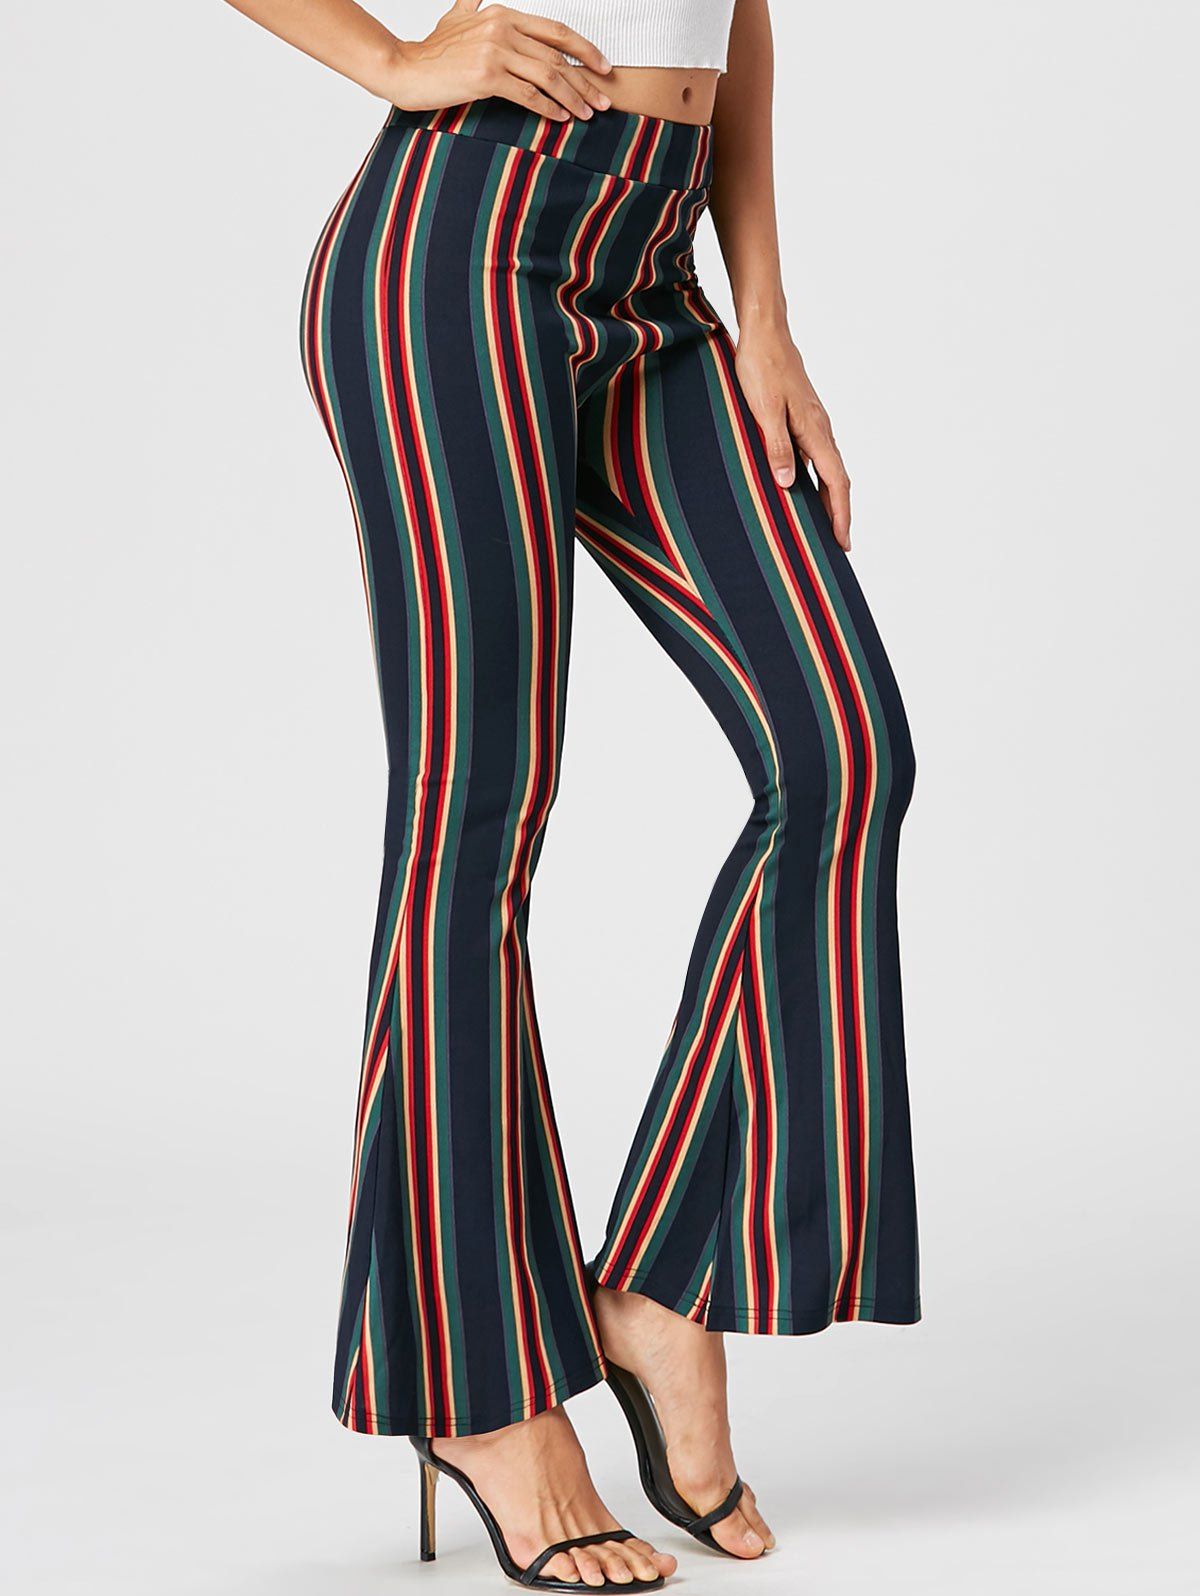 [17% OFF] 2021 Striped Flare Pants In COLORMIX | DressLily